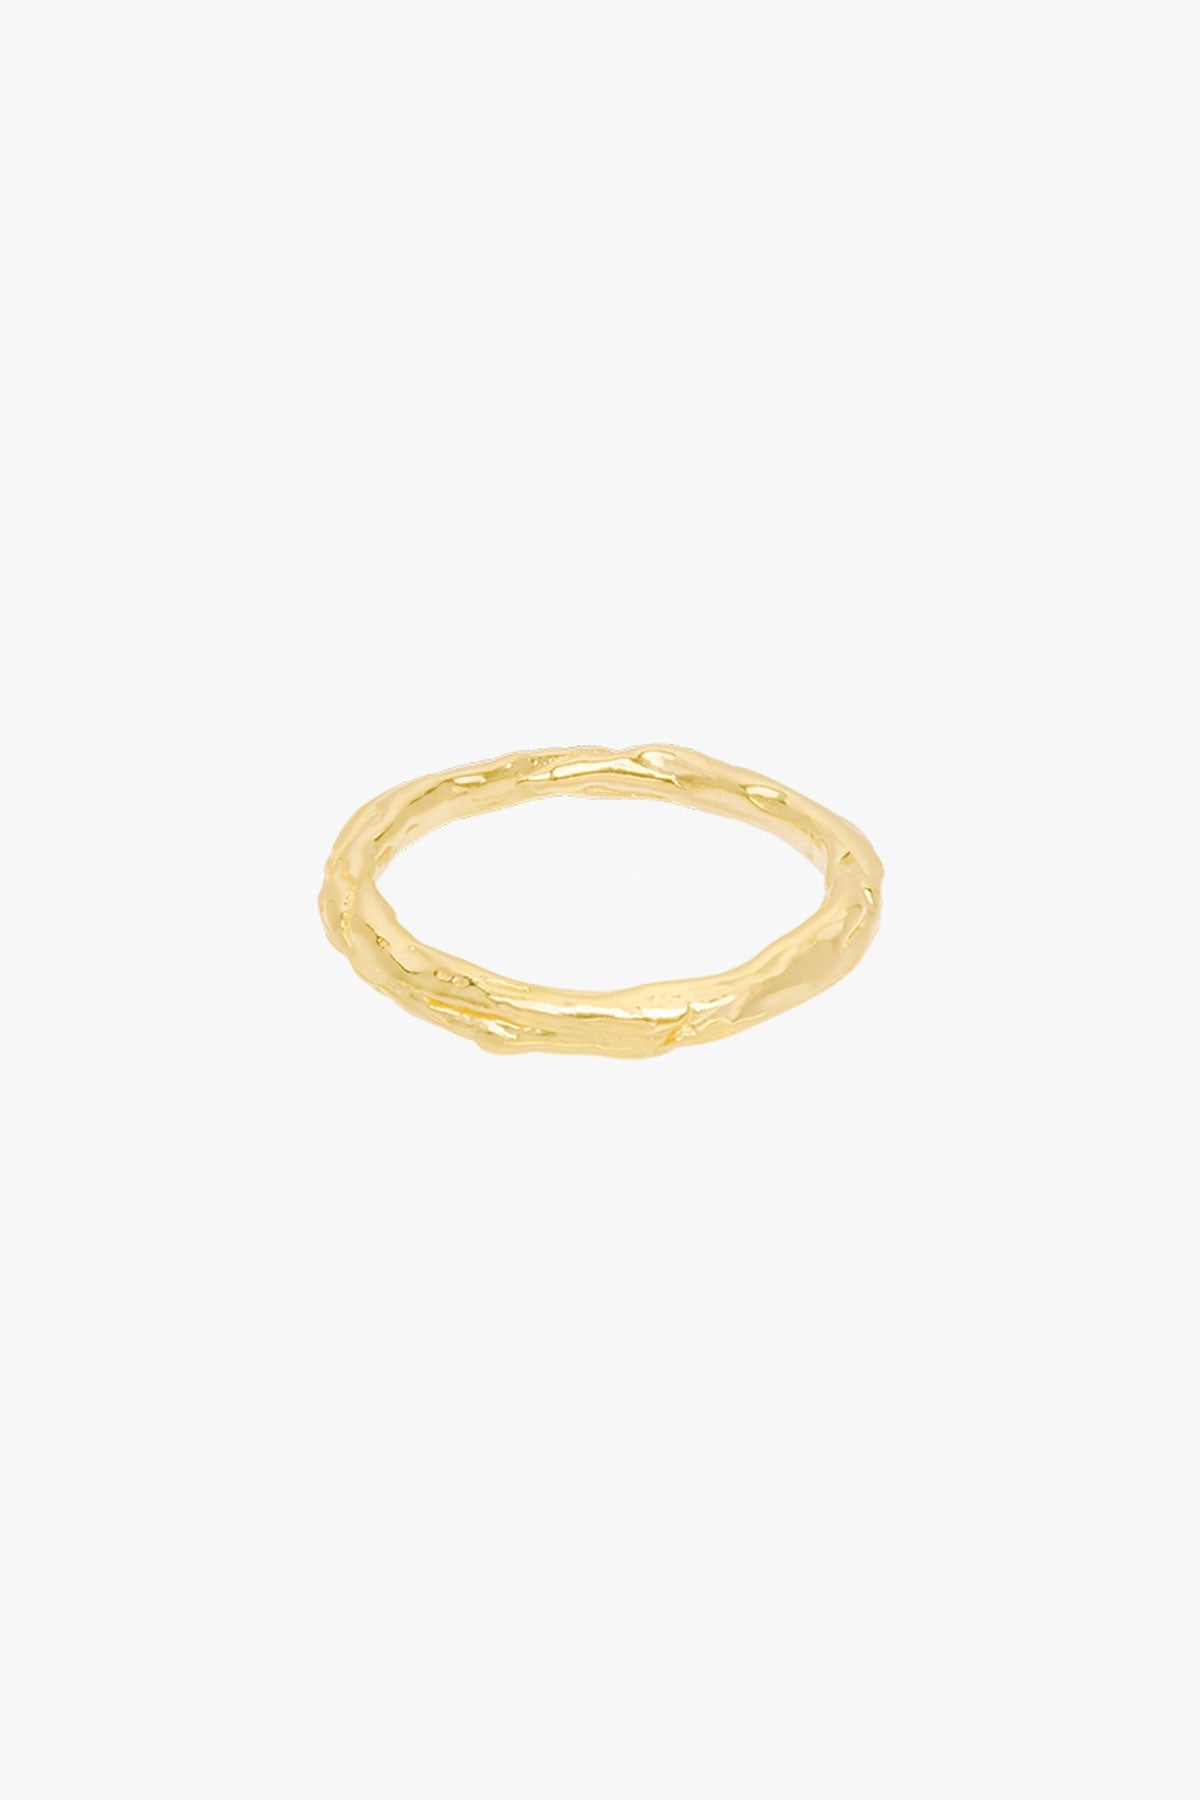 Ring Water ripple Gold | wildthings